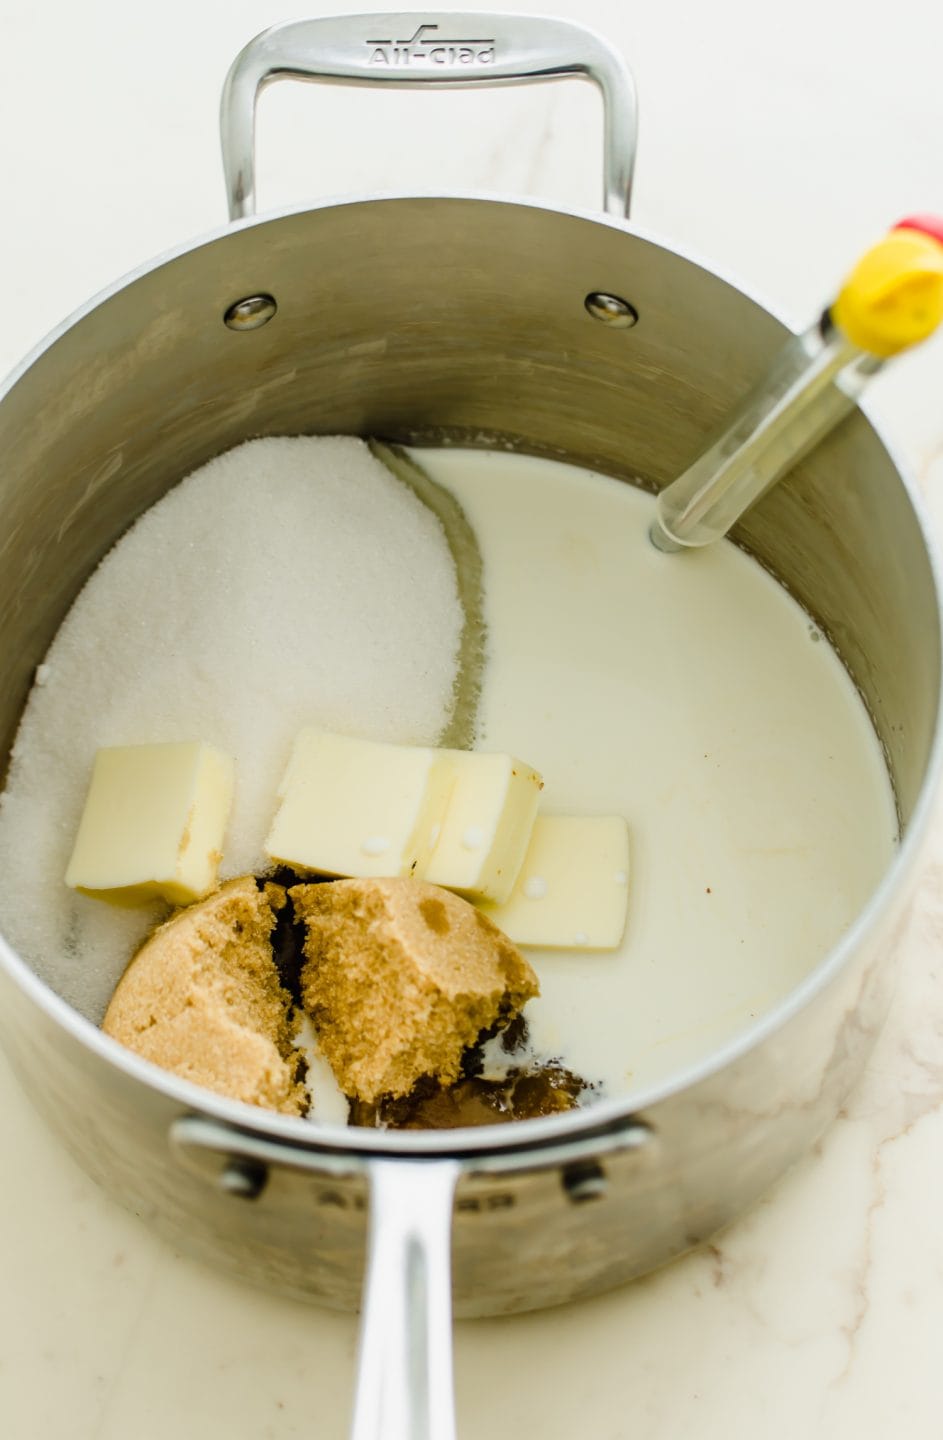 A metal pot filled with ingredients for making pecan pralines and a candy thermometer inserted.